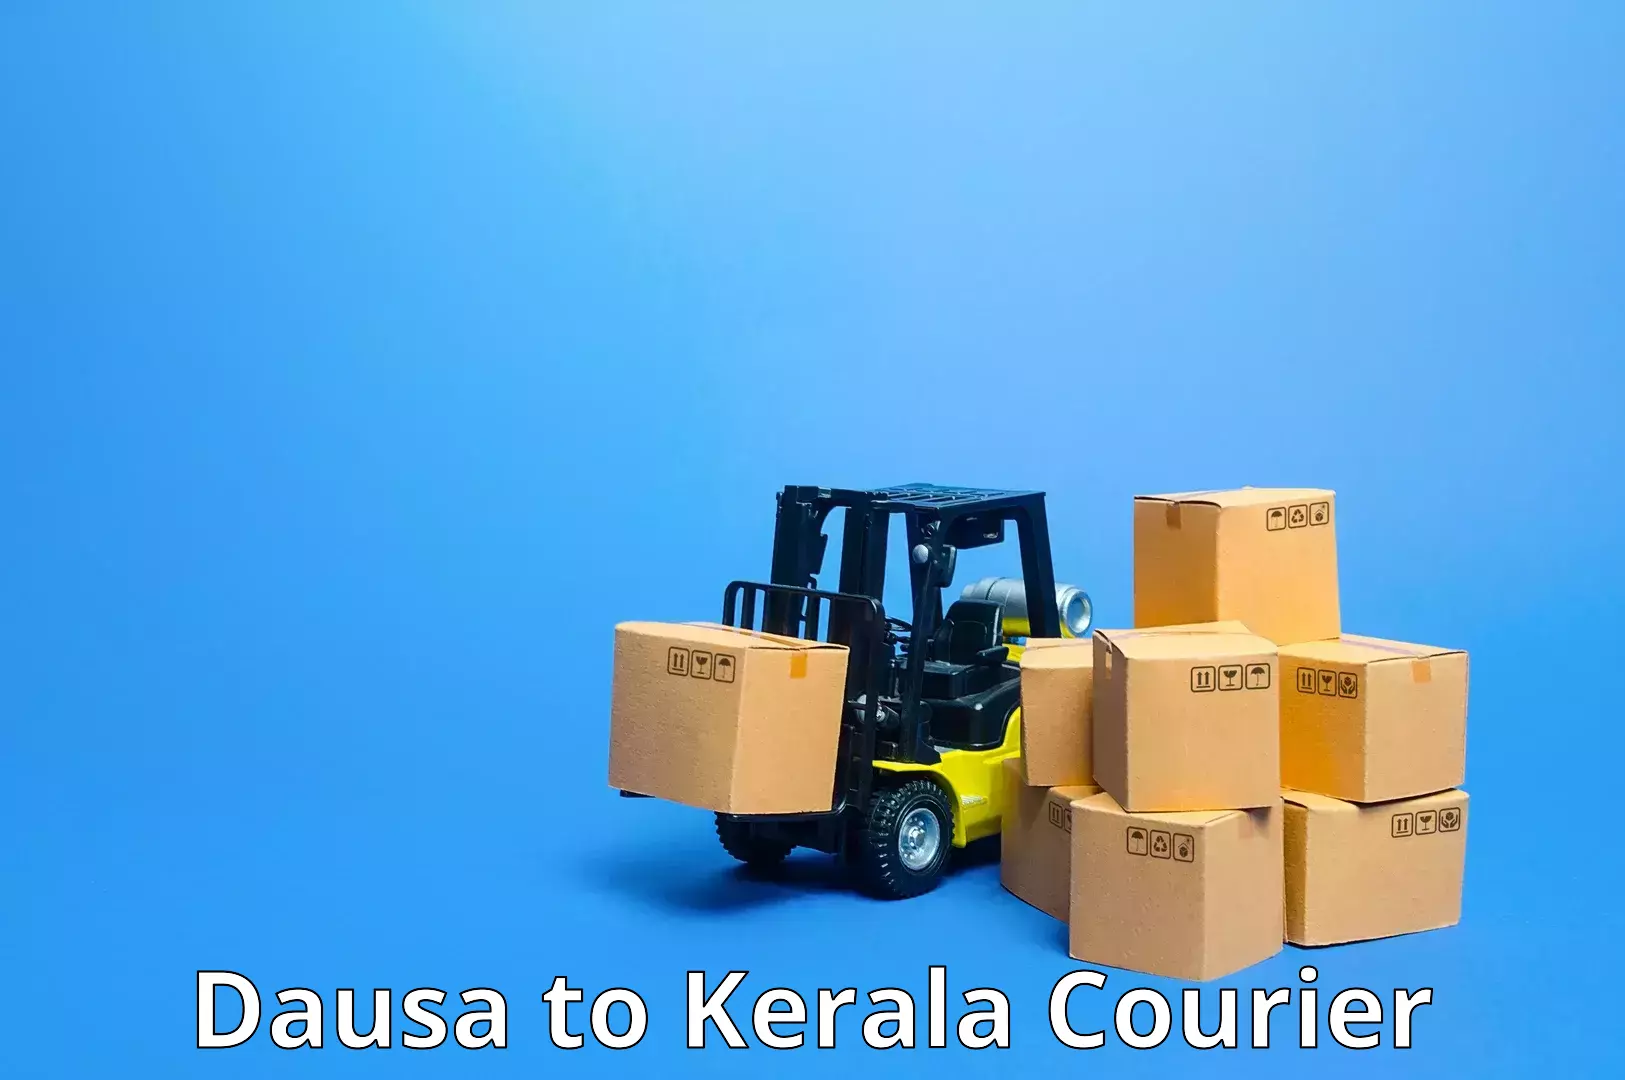 Global shipping networks Dausa to North Paravur